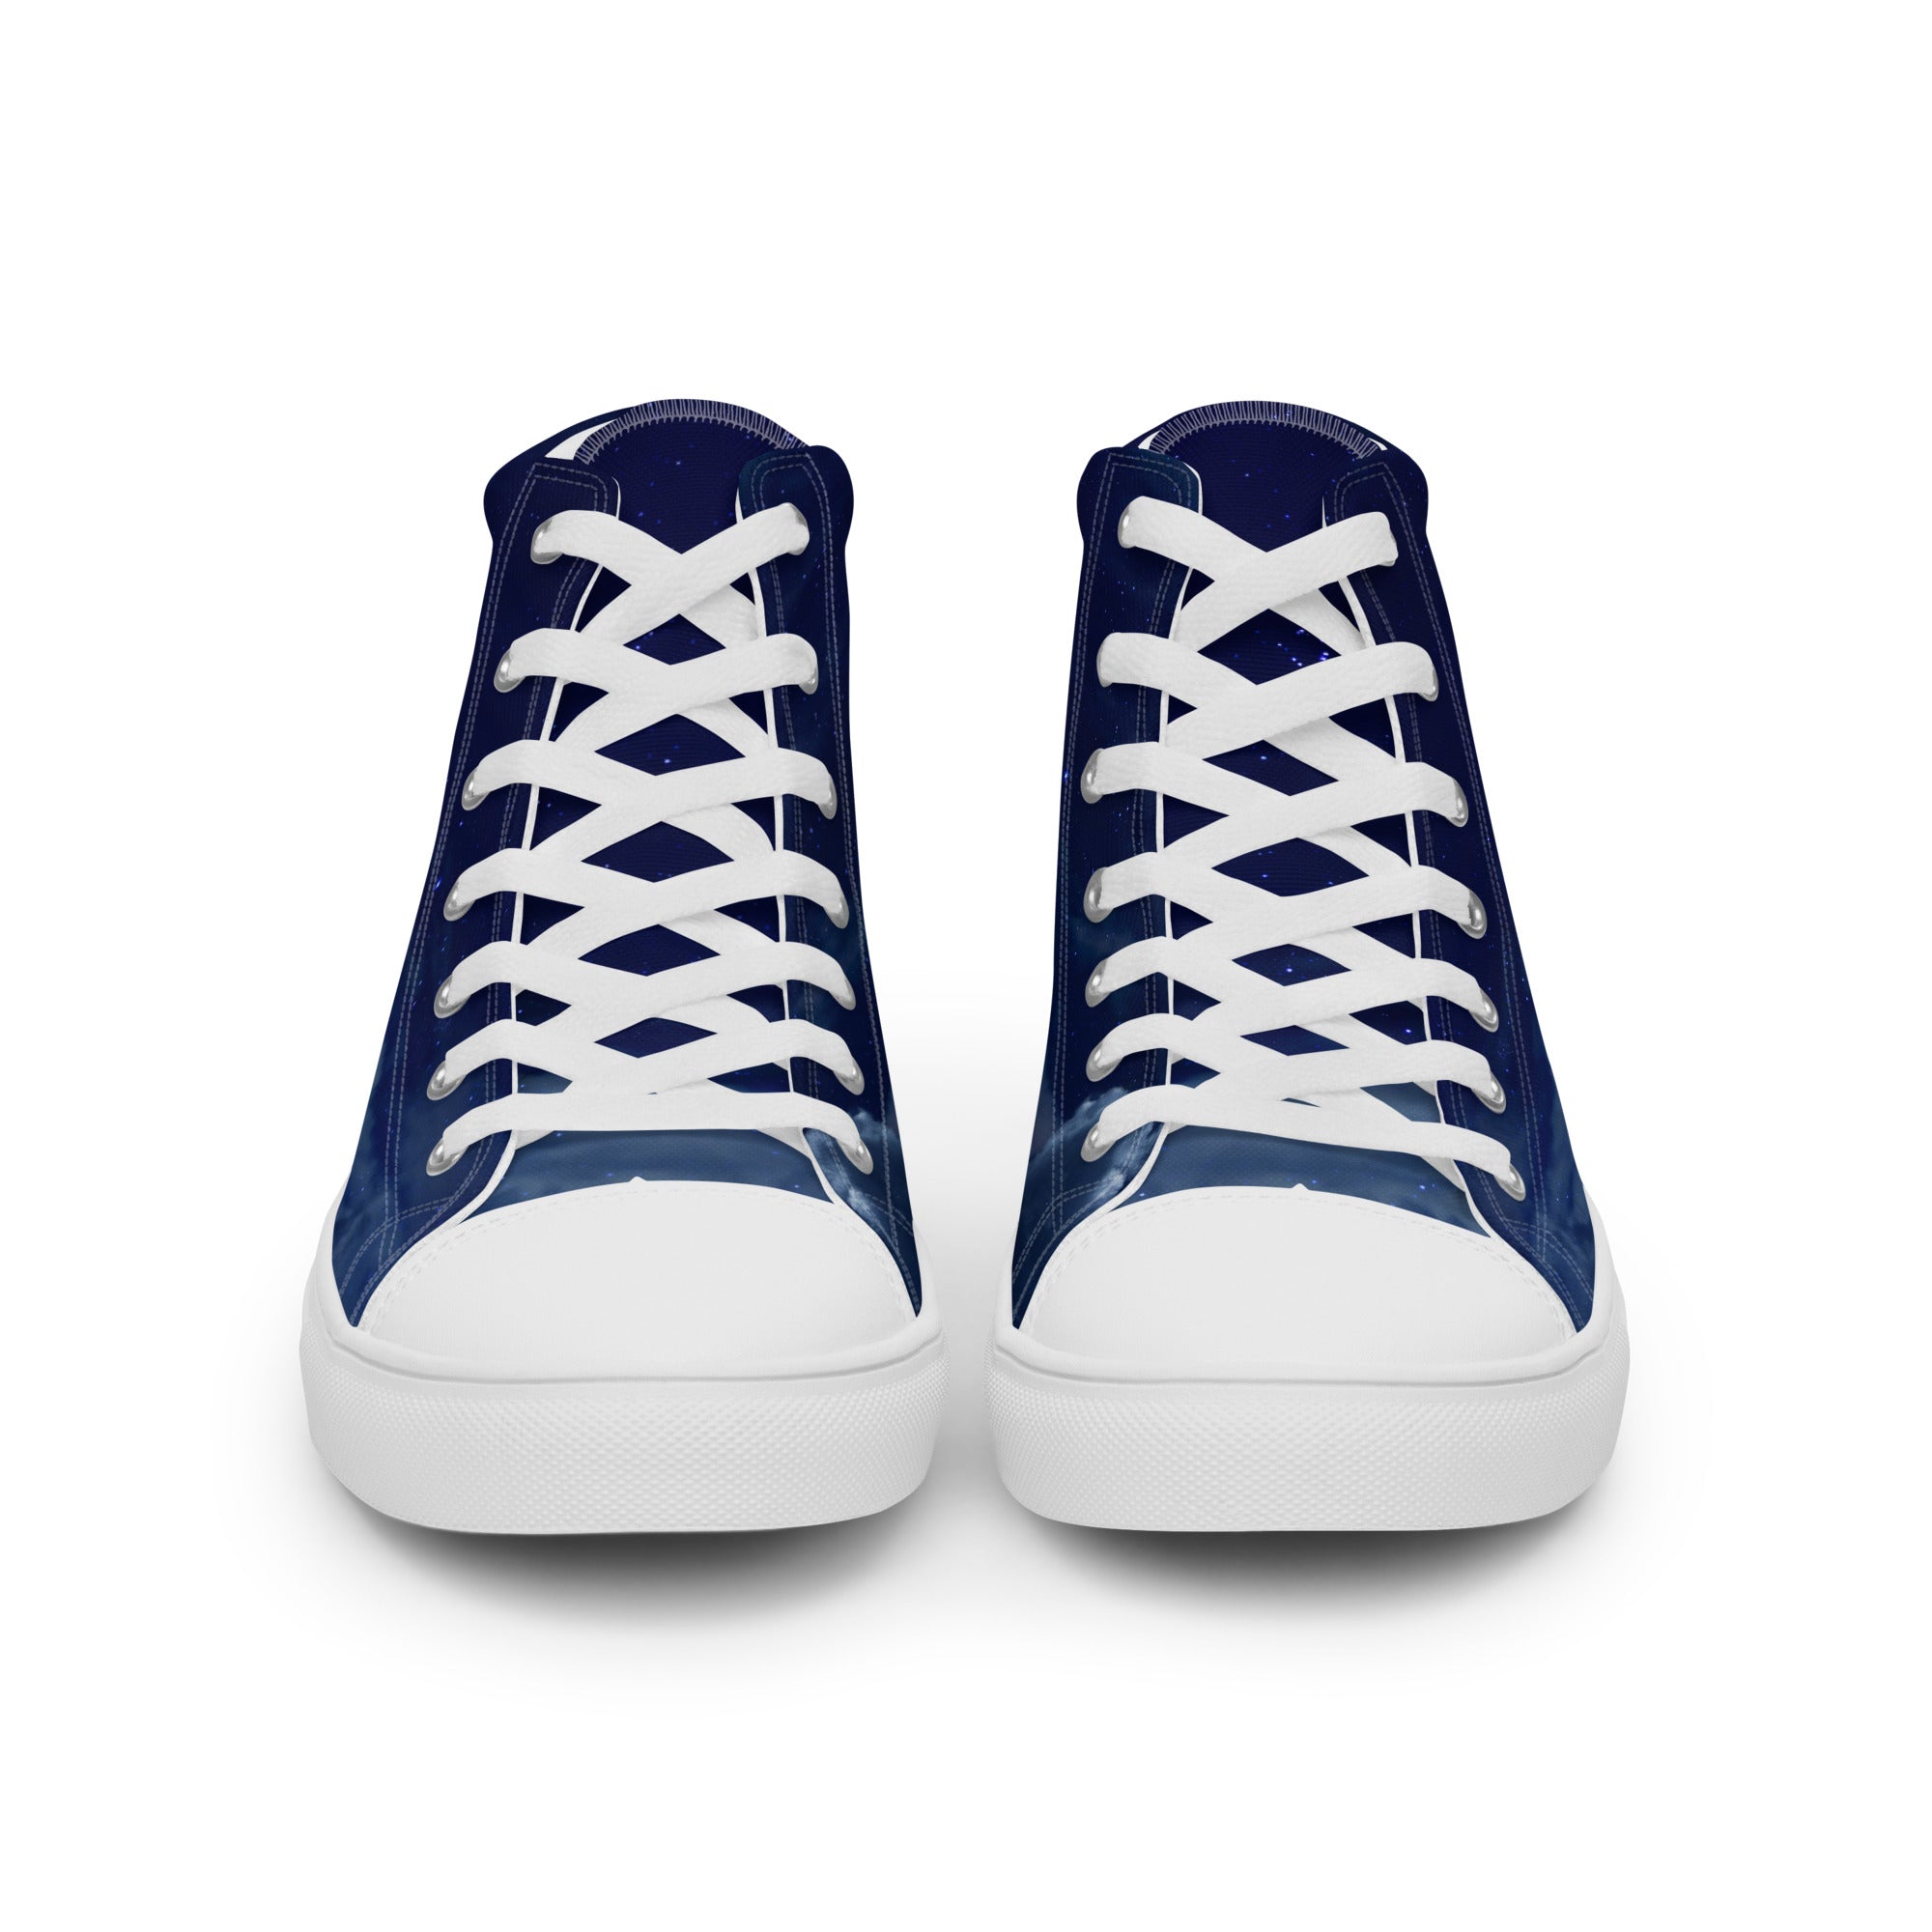 Night Sky Women’s high top canvas shoes